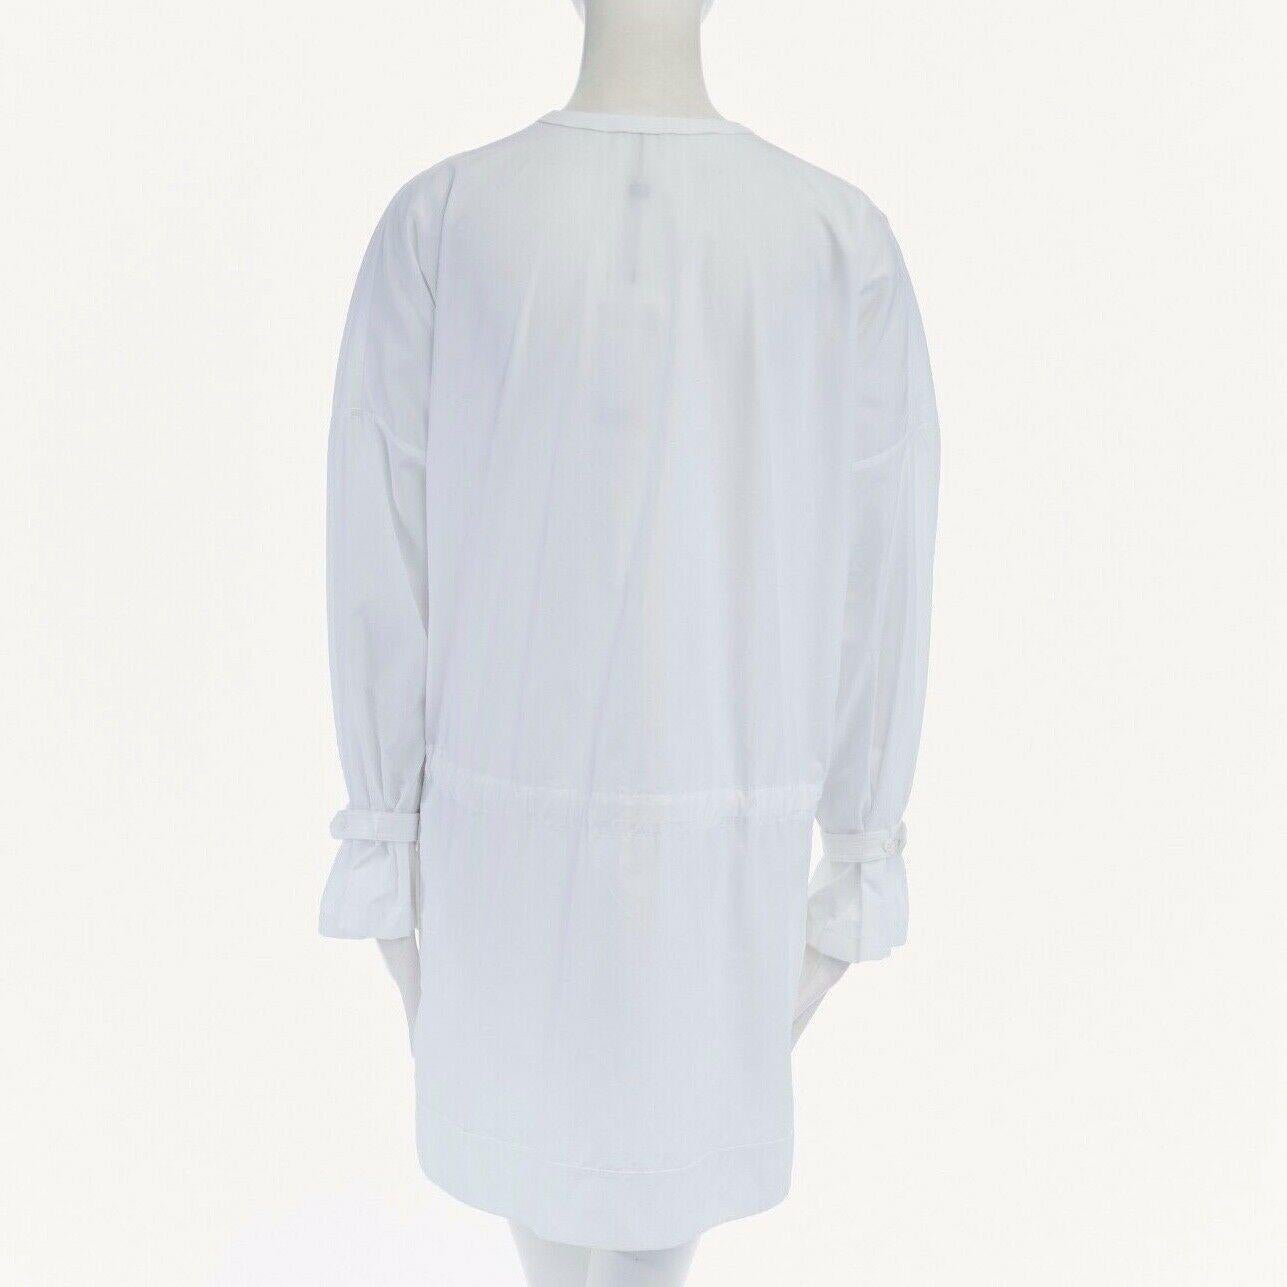 new ALEXANDER MCQUEEN white cotton lace front tunic dress FR38 US8 UK10 M 1